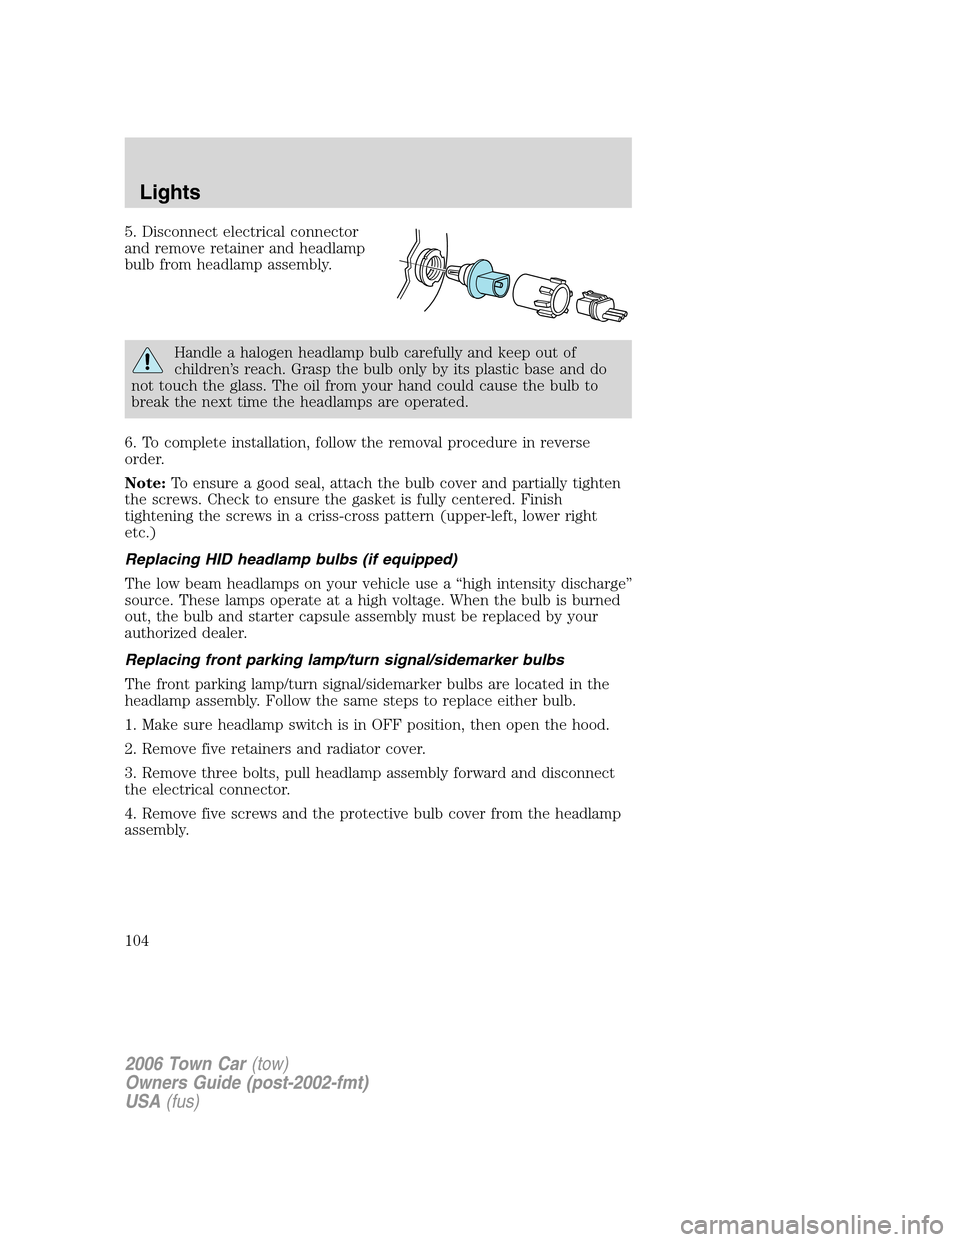 LINCOLN TOWN CAR 2006  Owners Manual 5. Disconnect electrical connector
and remove retainer and headlamp
bulb from headlamp assembly.
Handle a halogen headlamp bulb carefully and keep out of
children’s reach. Grasp the bulb only by its